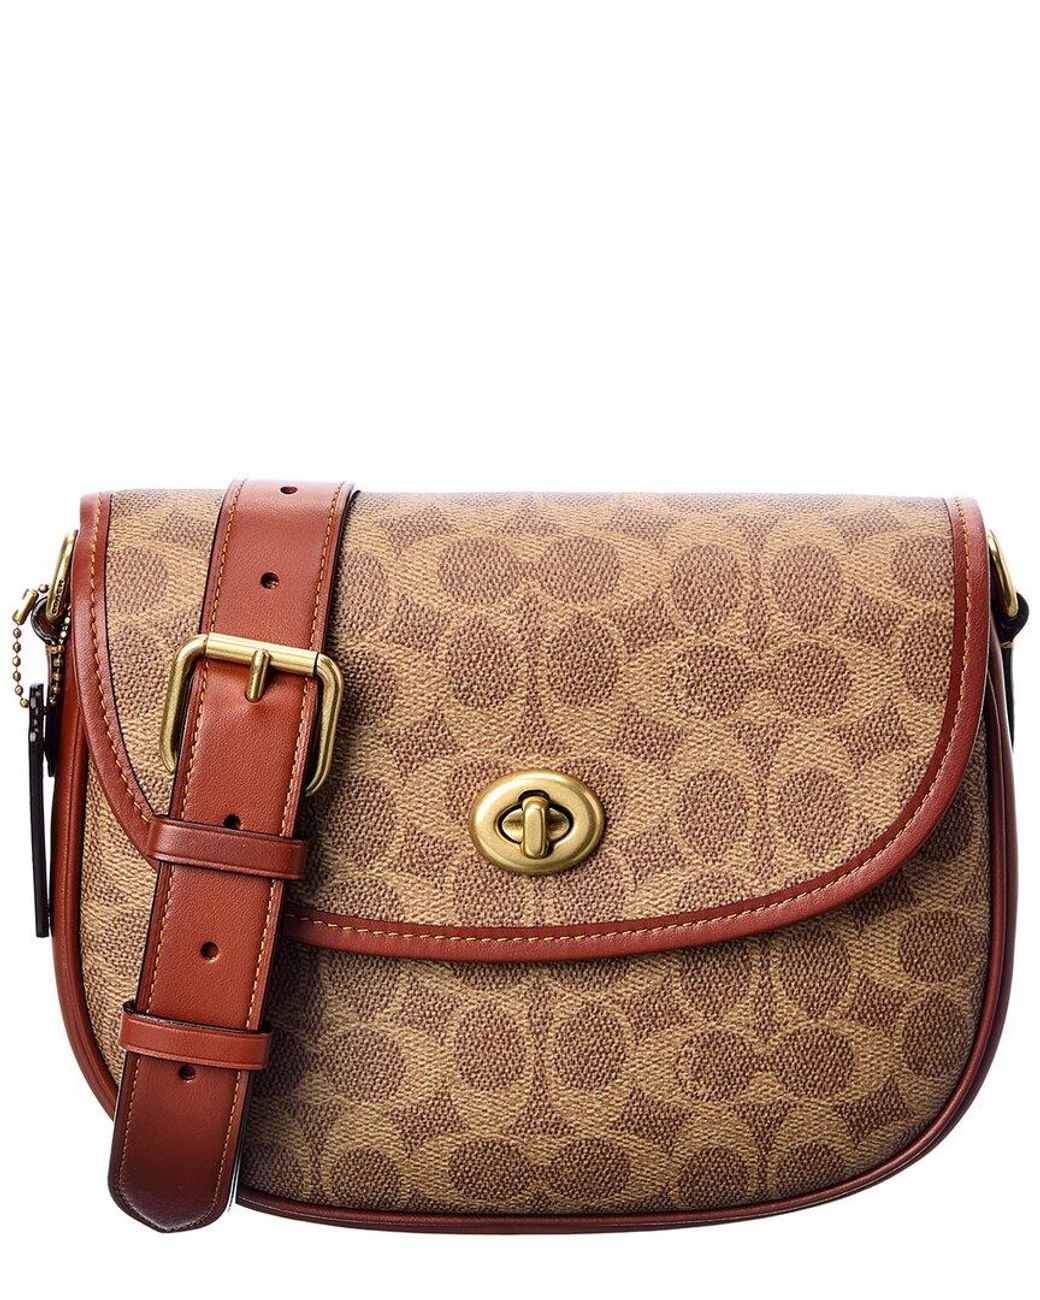 COACH Willow Coated Canvas & Leather Saddle Bag in Brown | Lyst